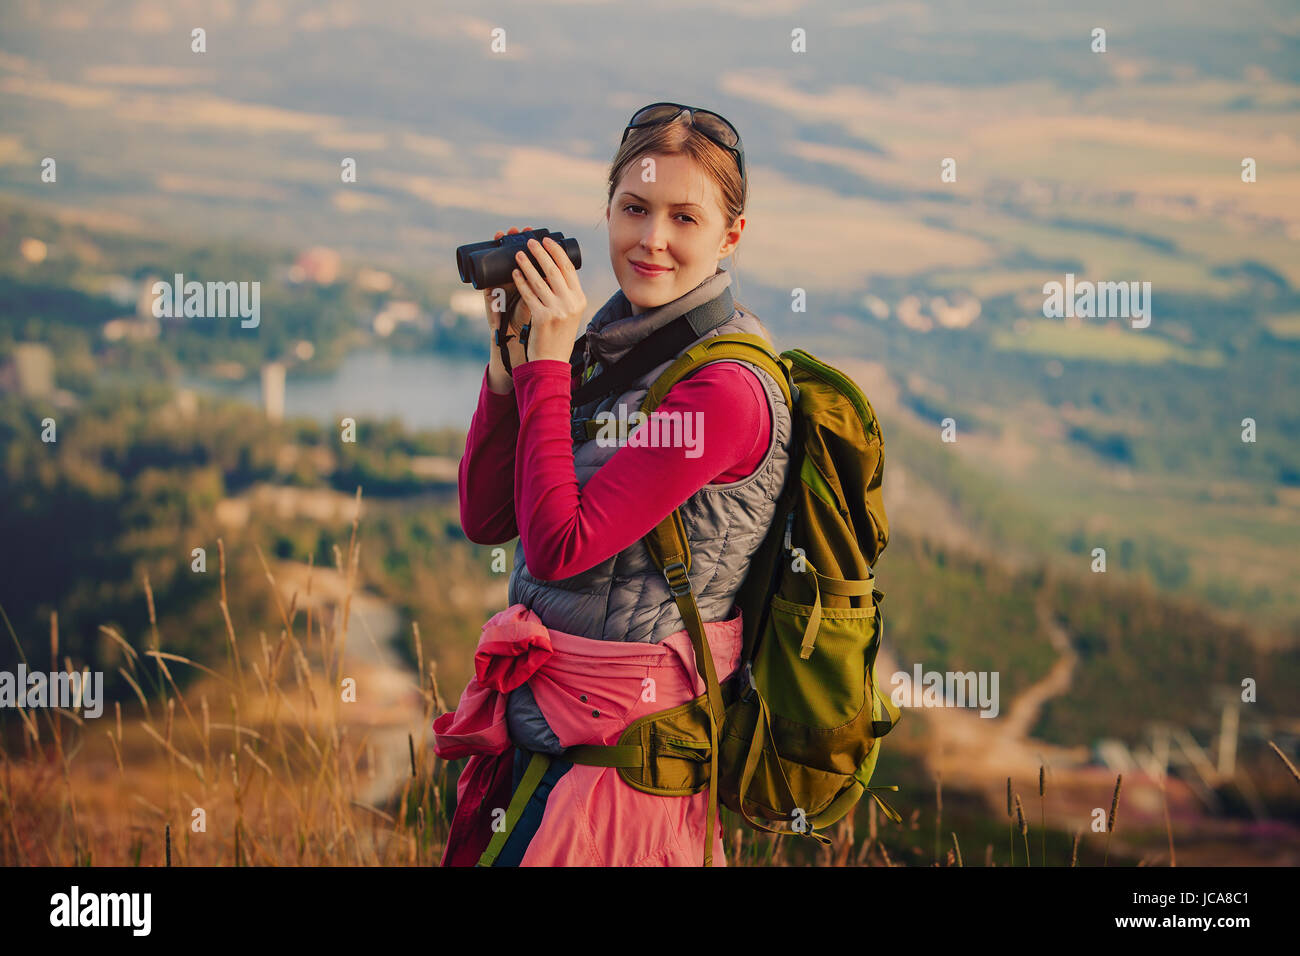 Young woman tourist standing with binoculars on mountain portrait Stock Photo